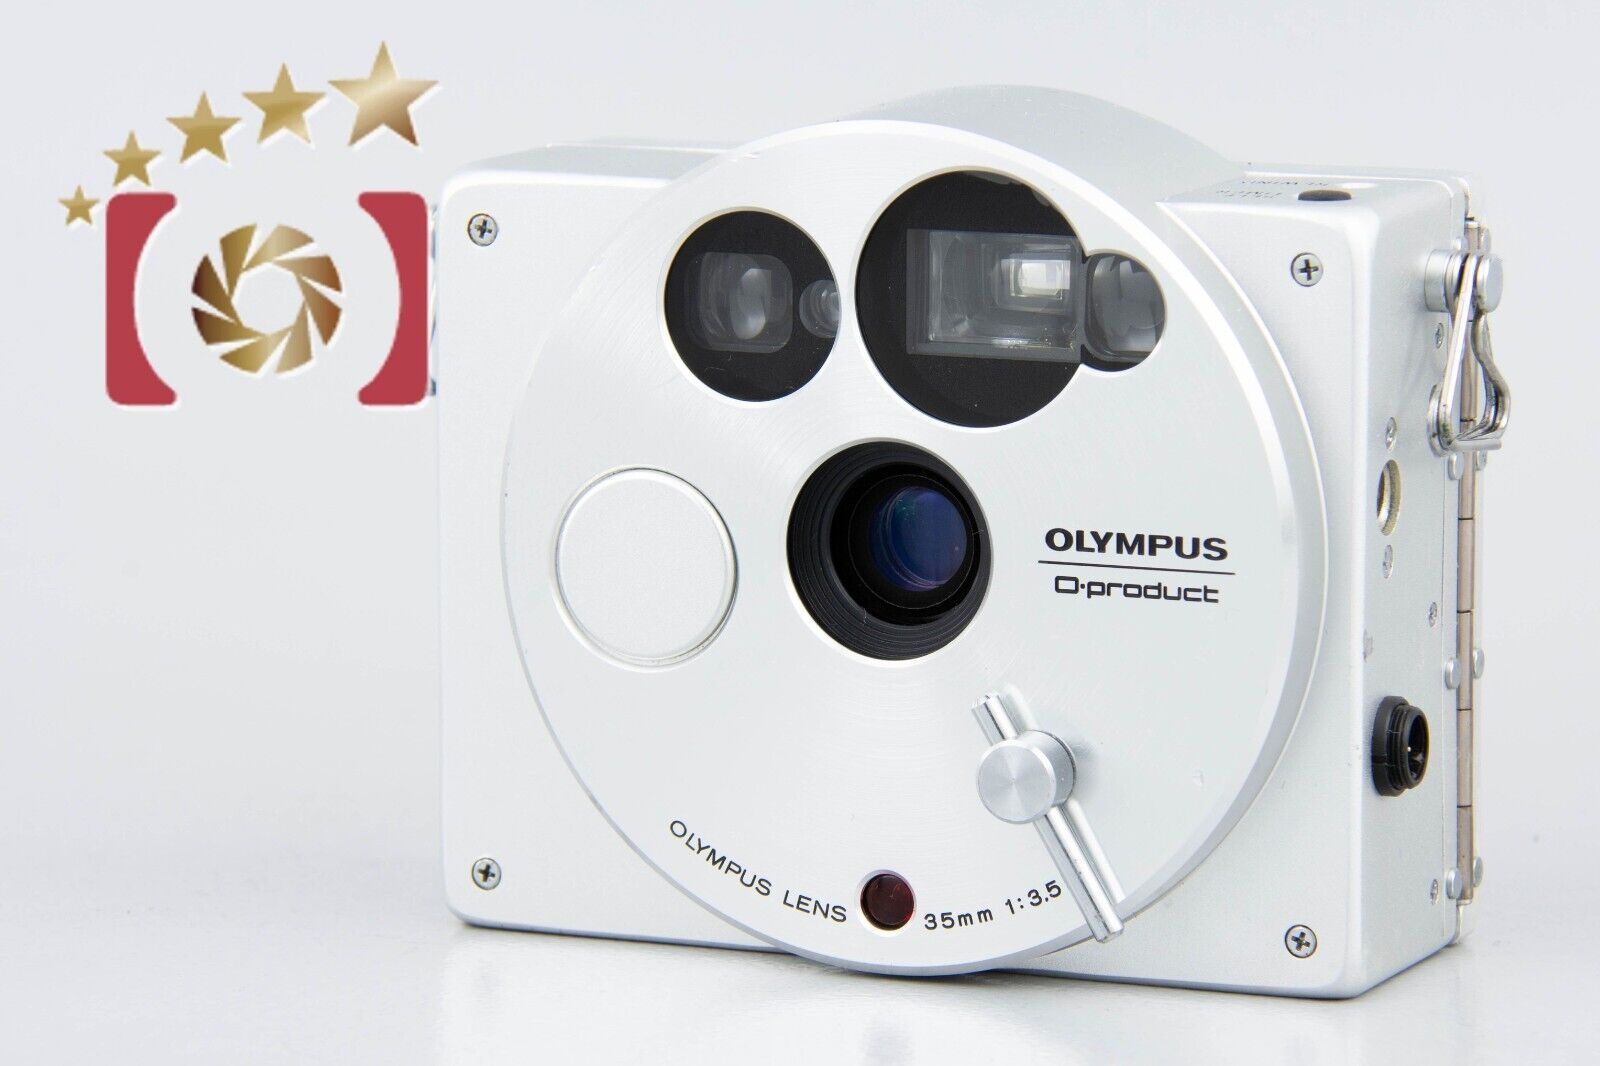 Olympus O-product 35mm Point & Shoot Film Camera